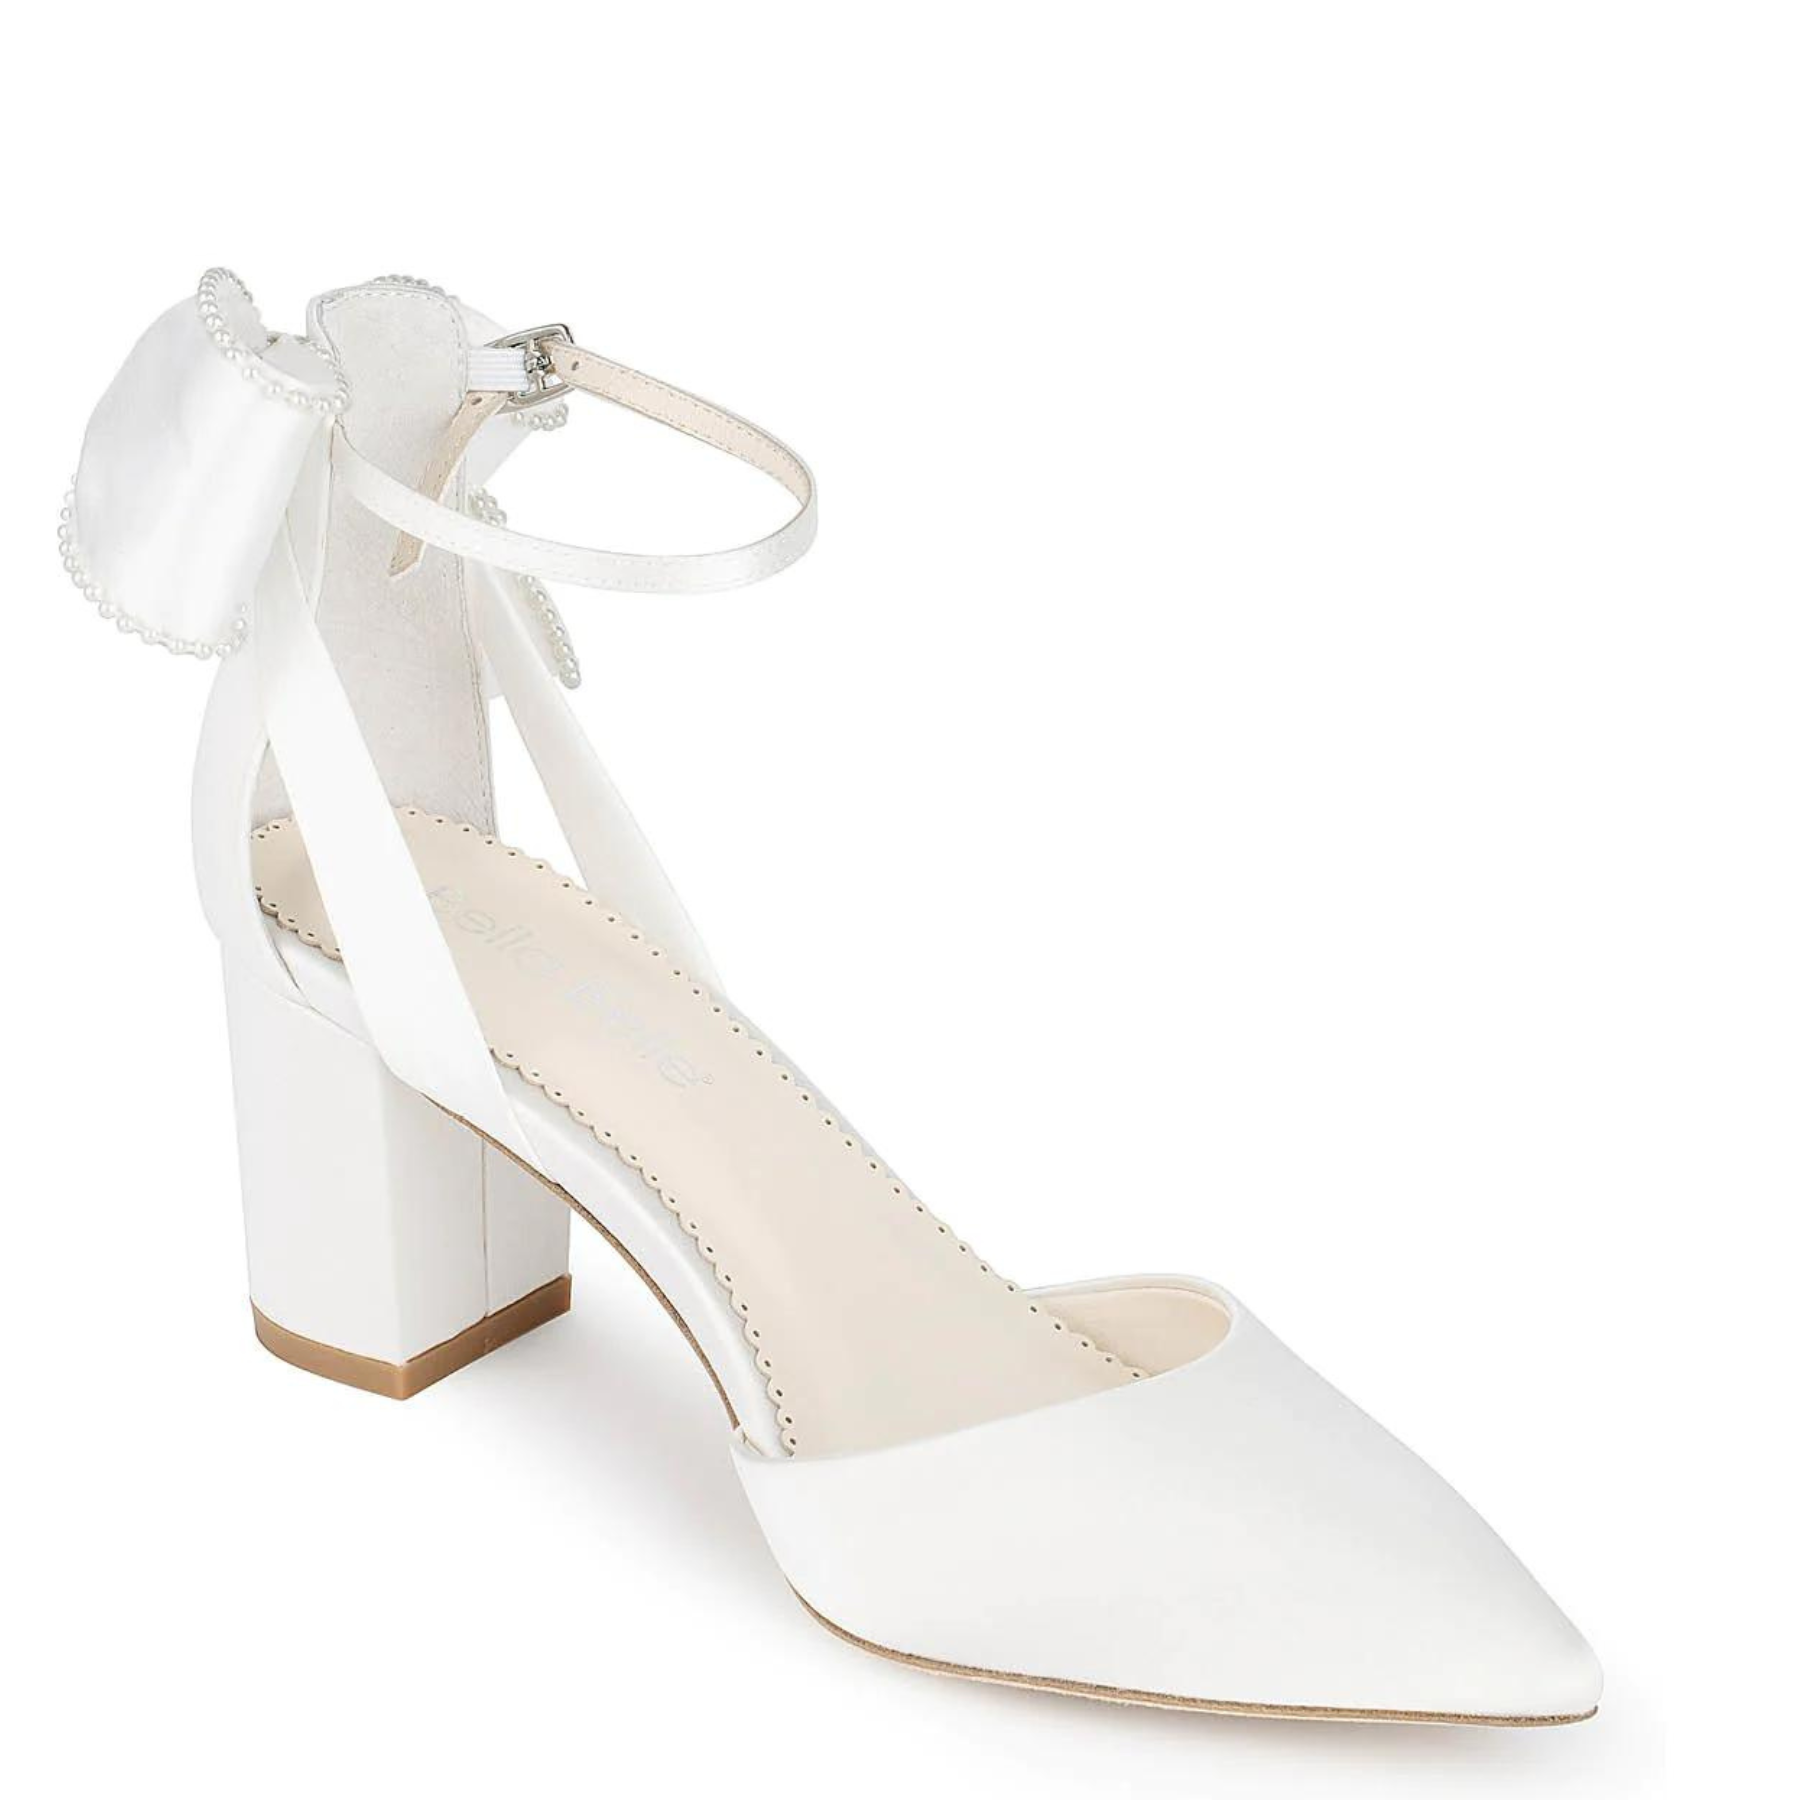 Pearl trim wedding shoes - Sandal with Block Heel - by Charlotte Mills